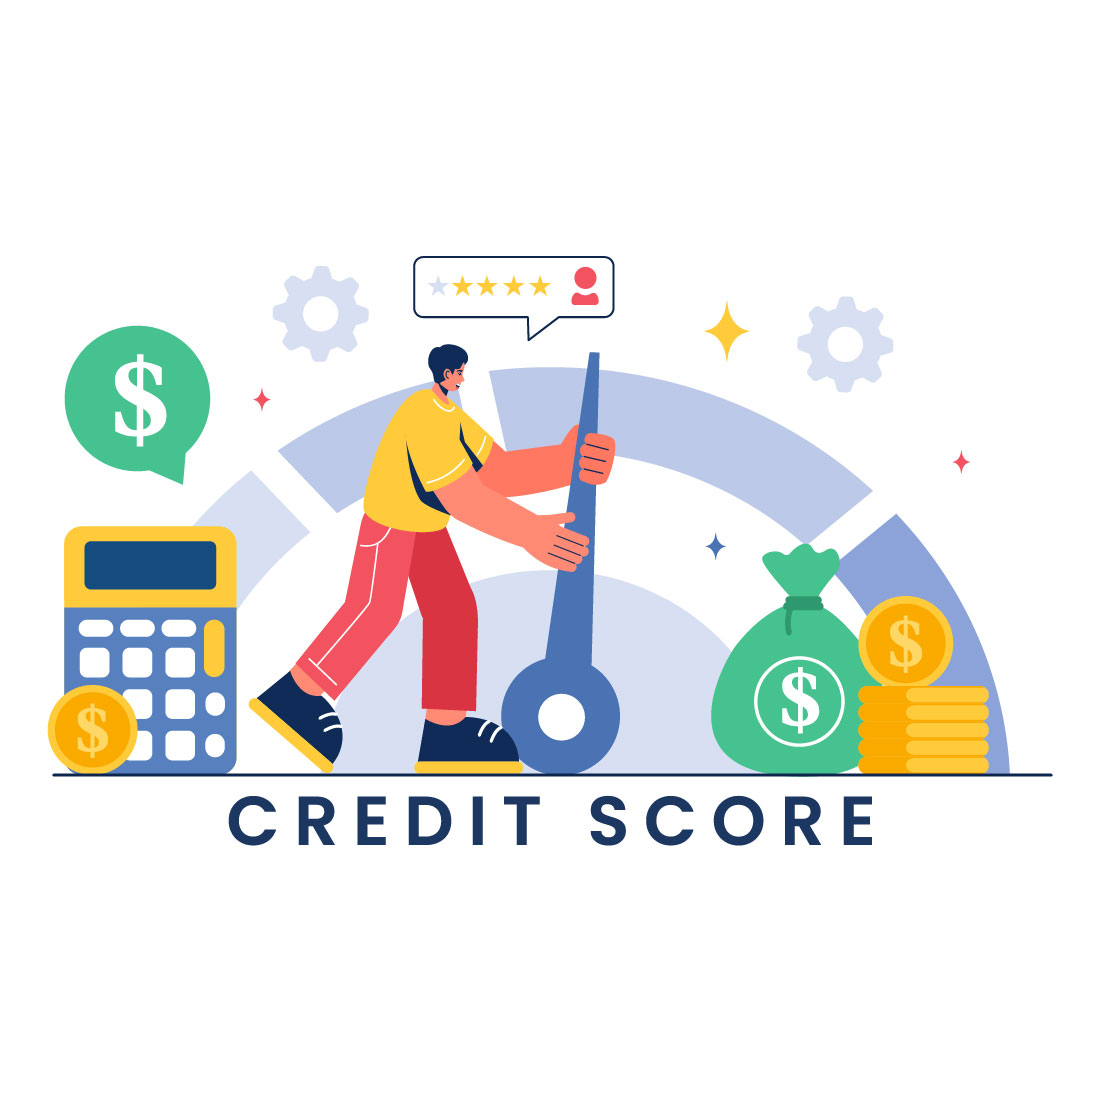 10 Credit Score Vector Illustration preview image.